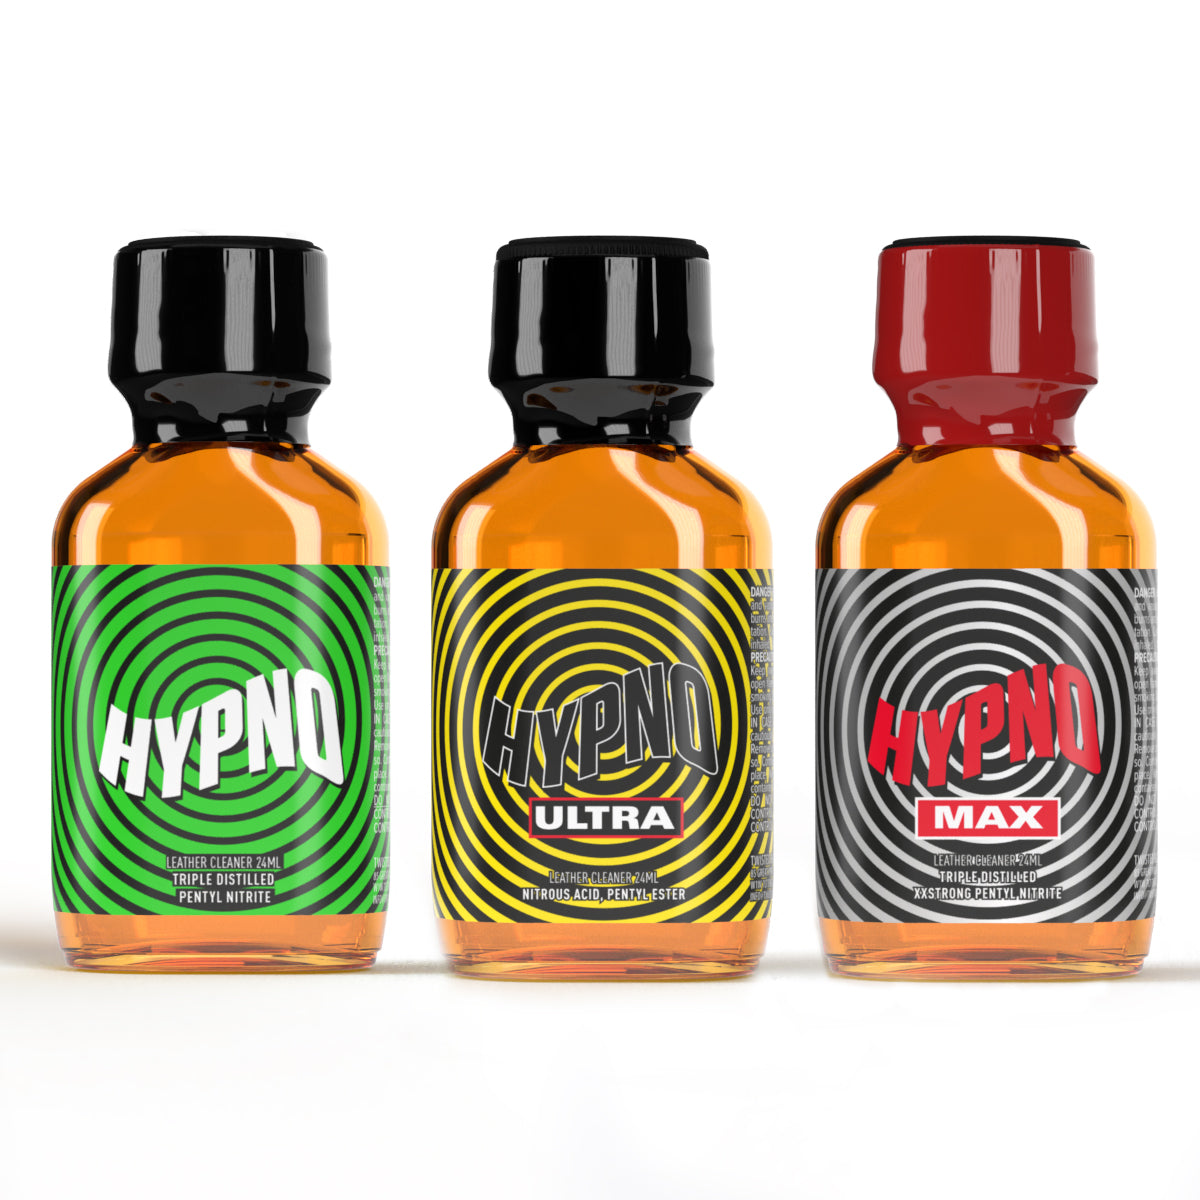 HYPNO-DRONE, POPPERS UK, POPPERS USA, FREE DELIVERY, NEXT DAY DELIVERY